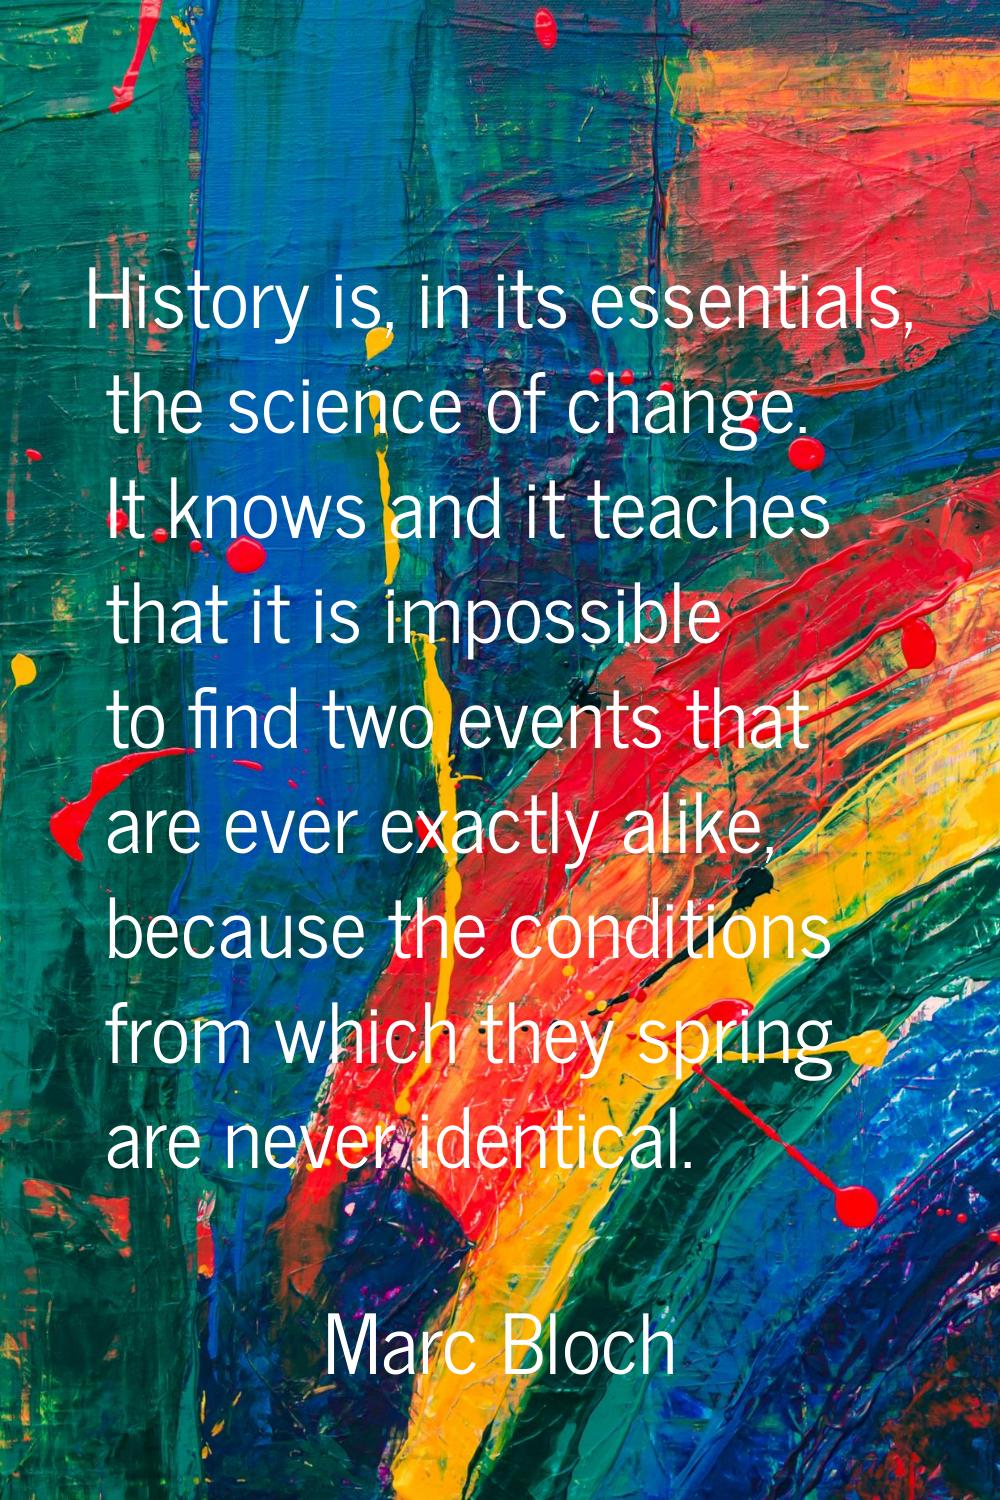 History is, in its essentials, the science of change. It knows and it teaches that it is impossible